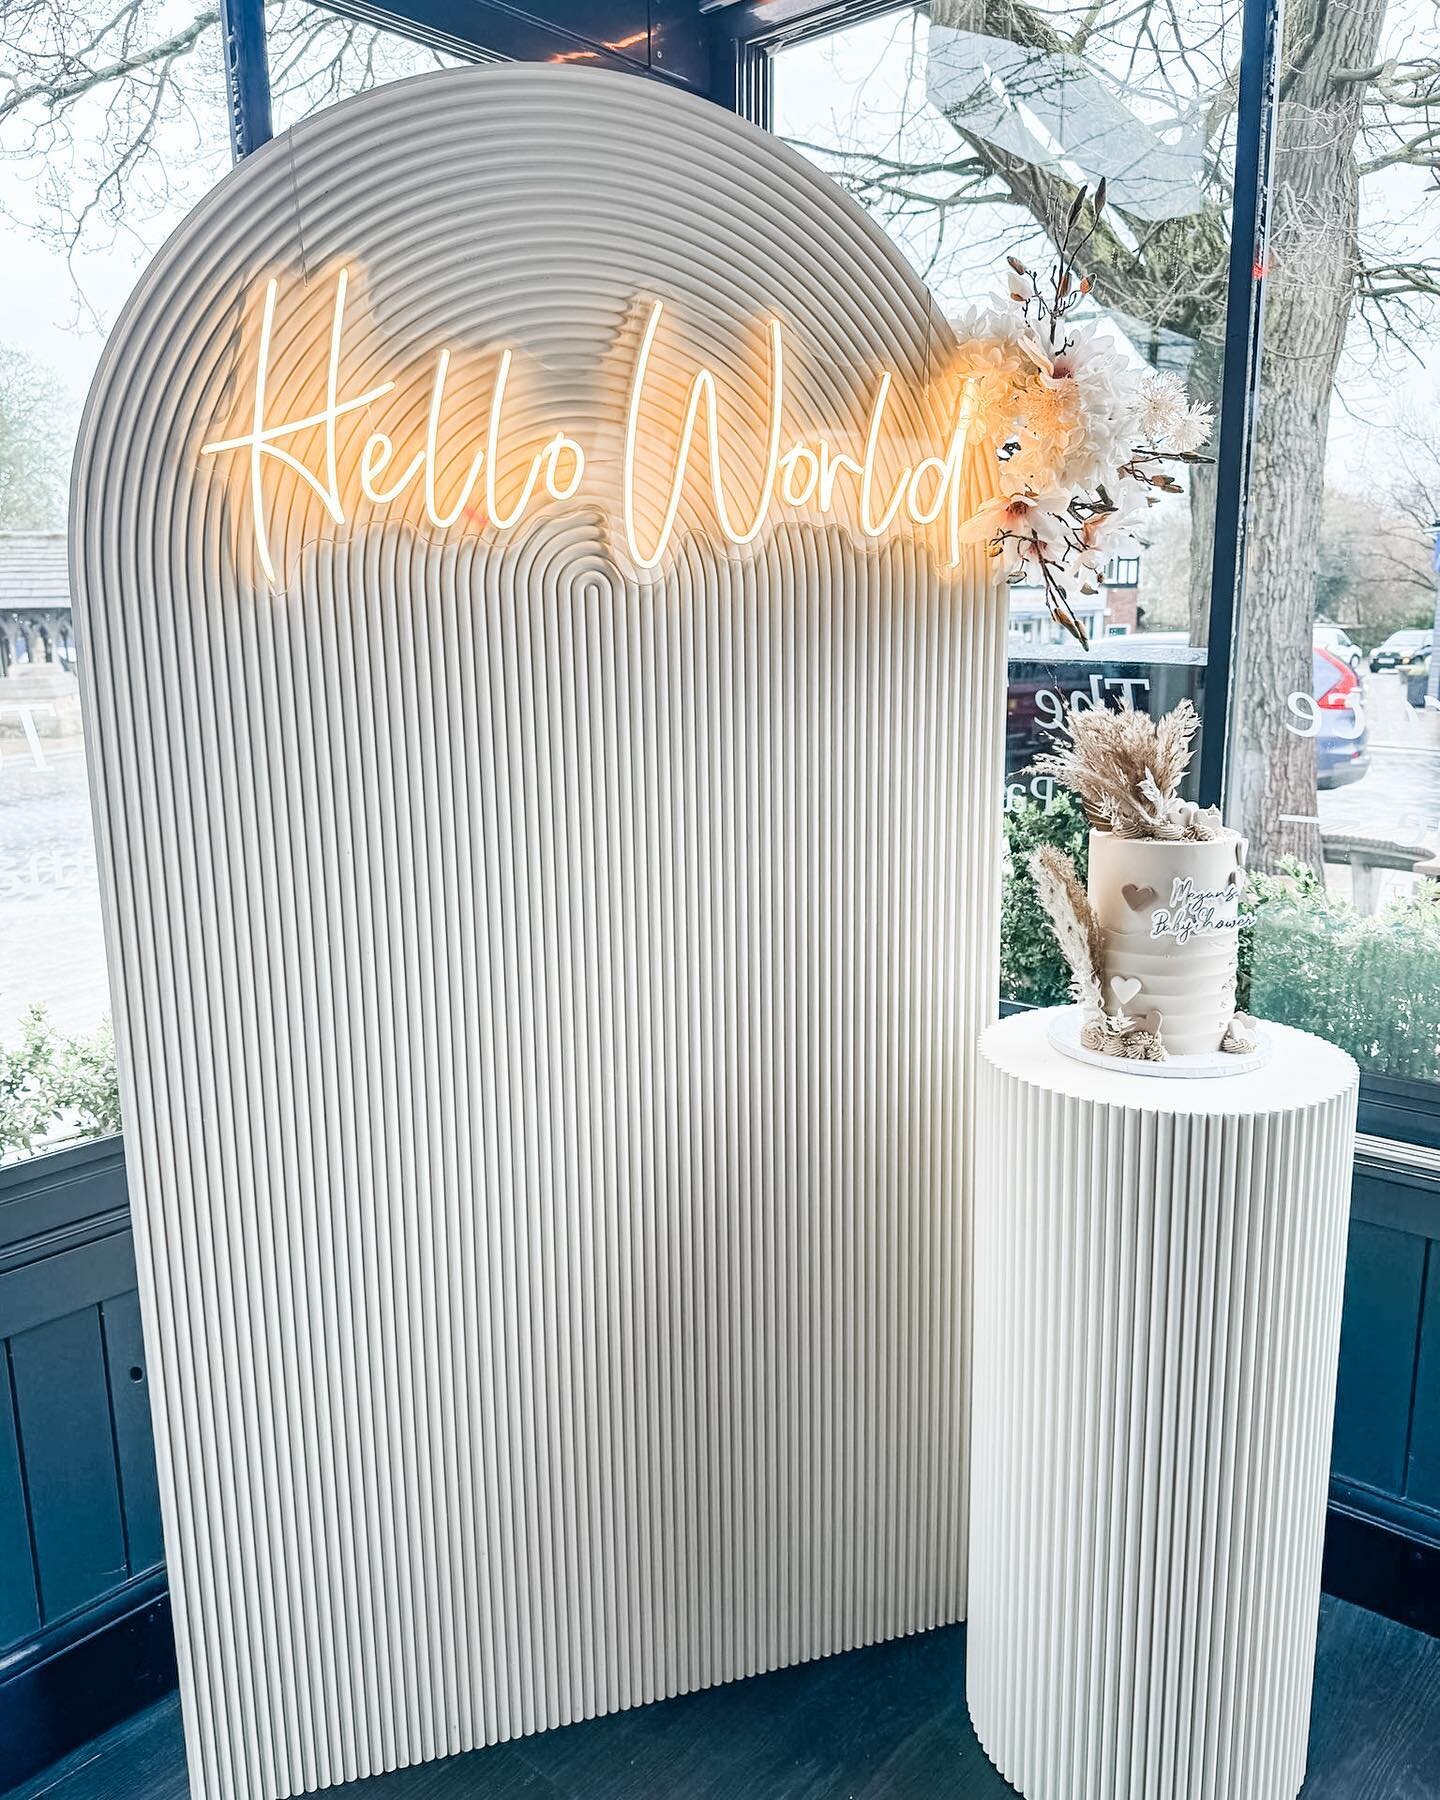 Matchy Matchy! 😍😍

Oh&rsquo; we are just loving our brand new refreshingly beautiful modern luxe Rippled Arch backdrop &amp; matching Cake stand in stunning cream! 🤍 What do you think? Comment below ⬇️ 

Perfect for any occasion and we are current